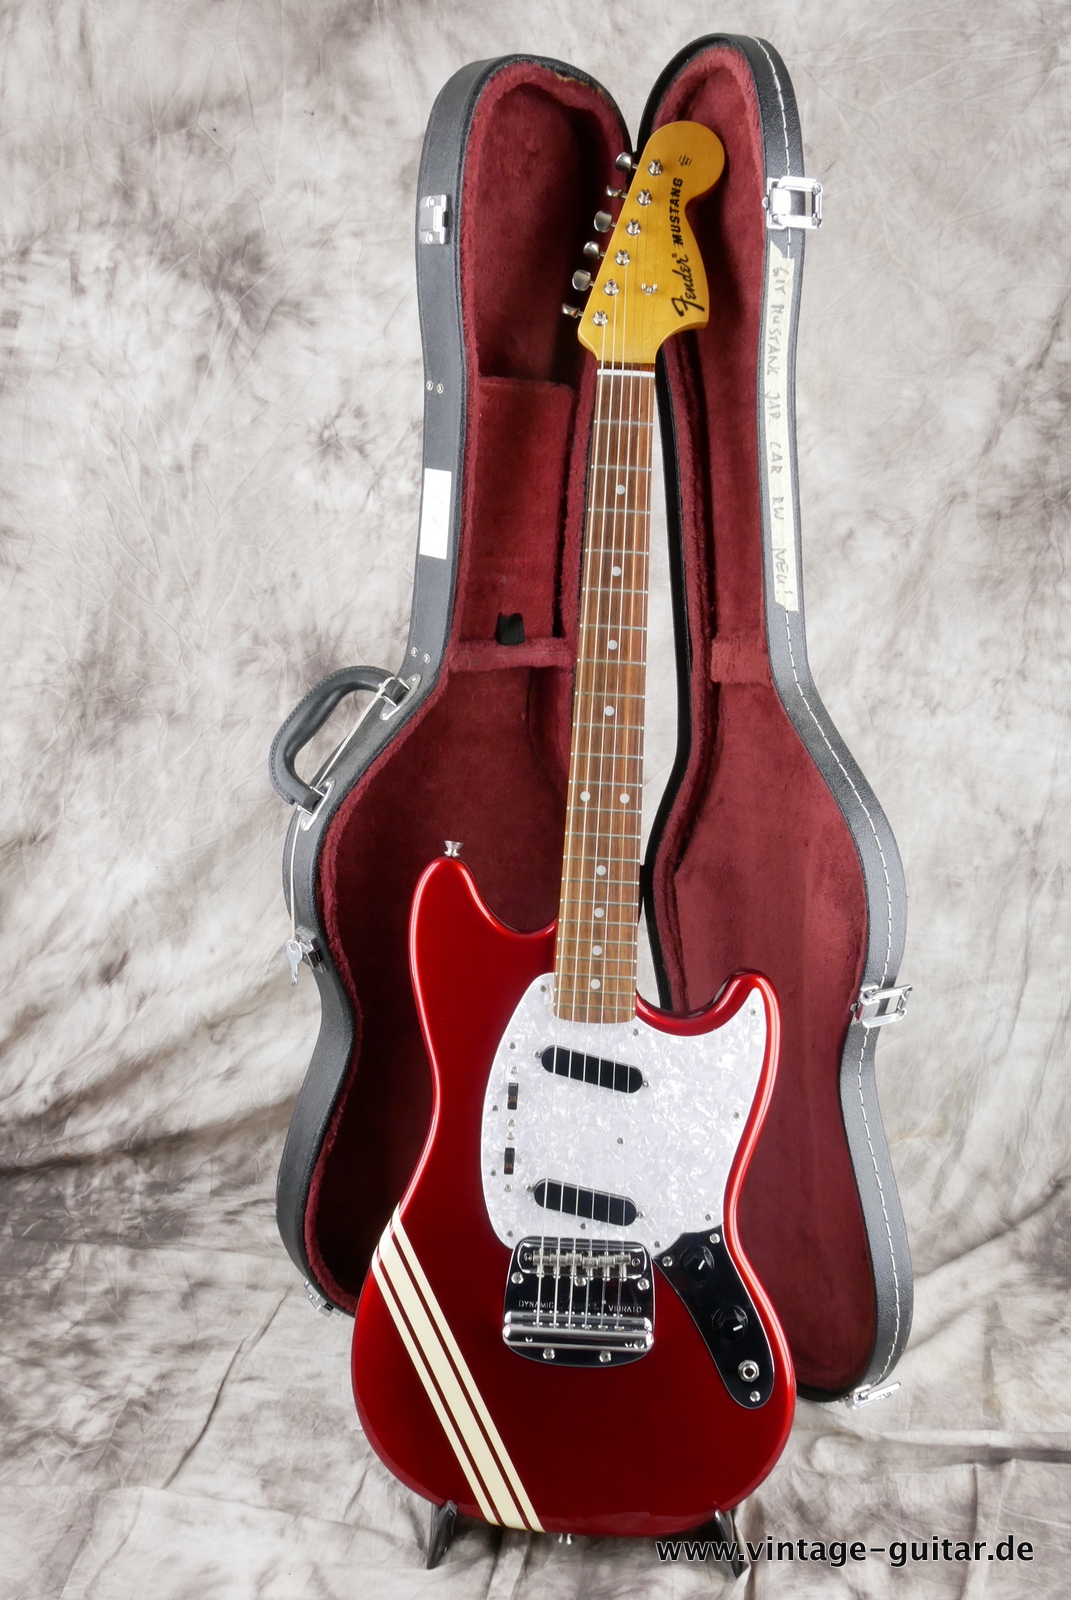 Fender_Mustang_competition_70s_RI_candy_apple_red_Japan_2002-013.JPG